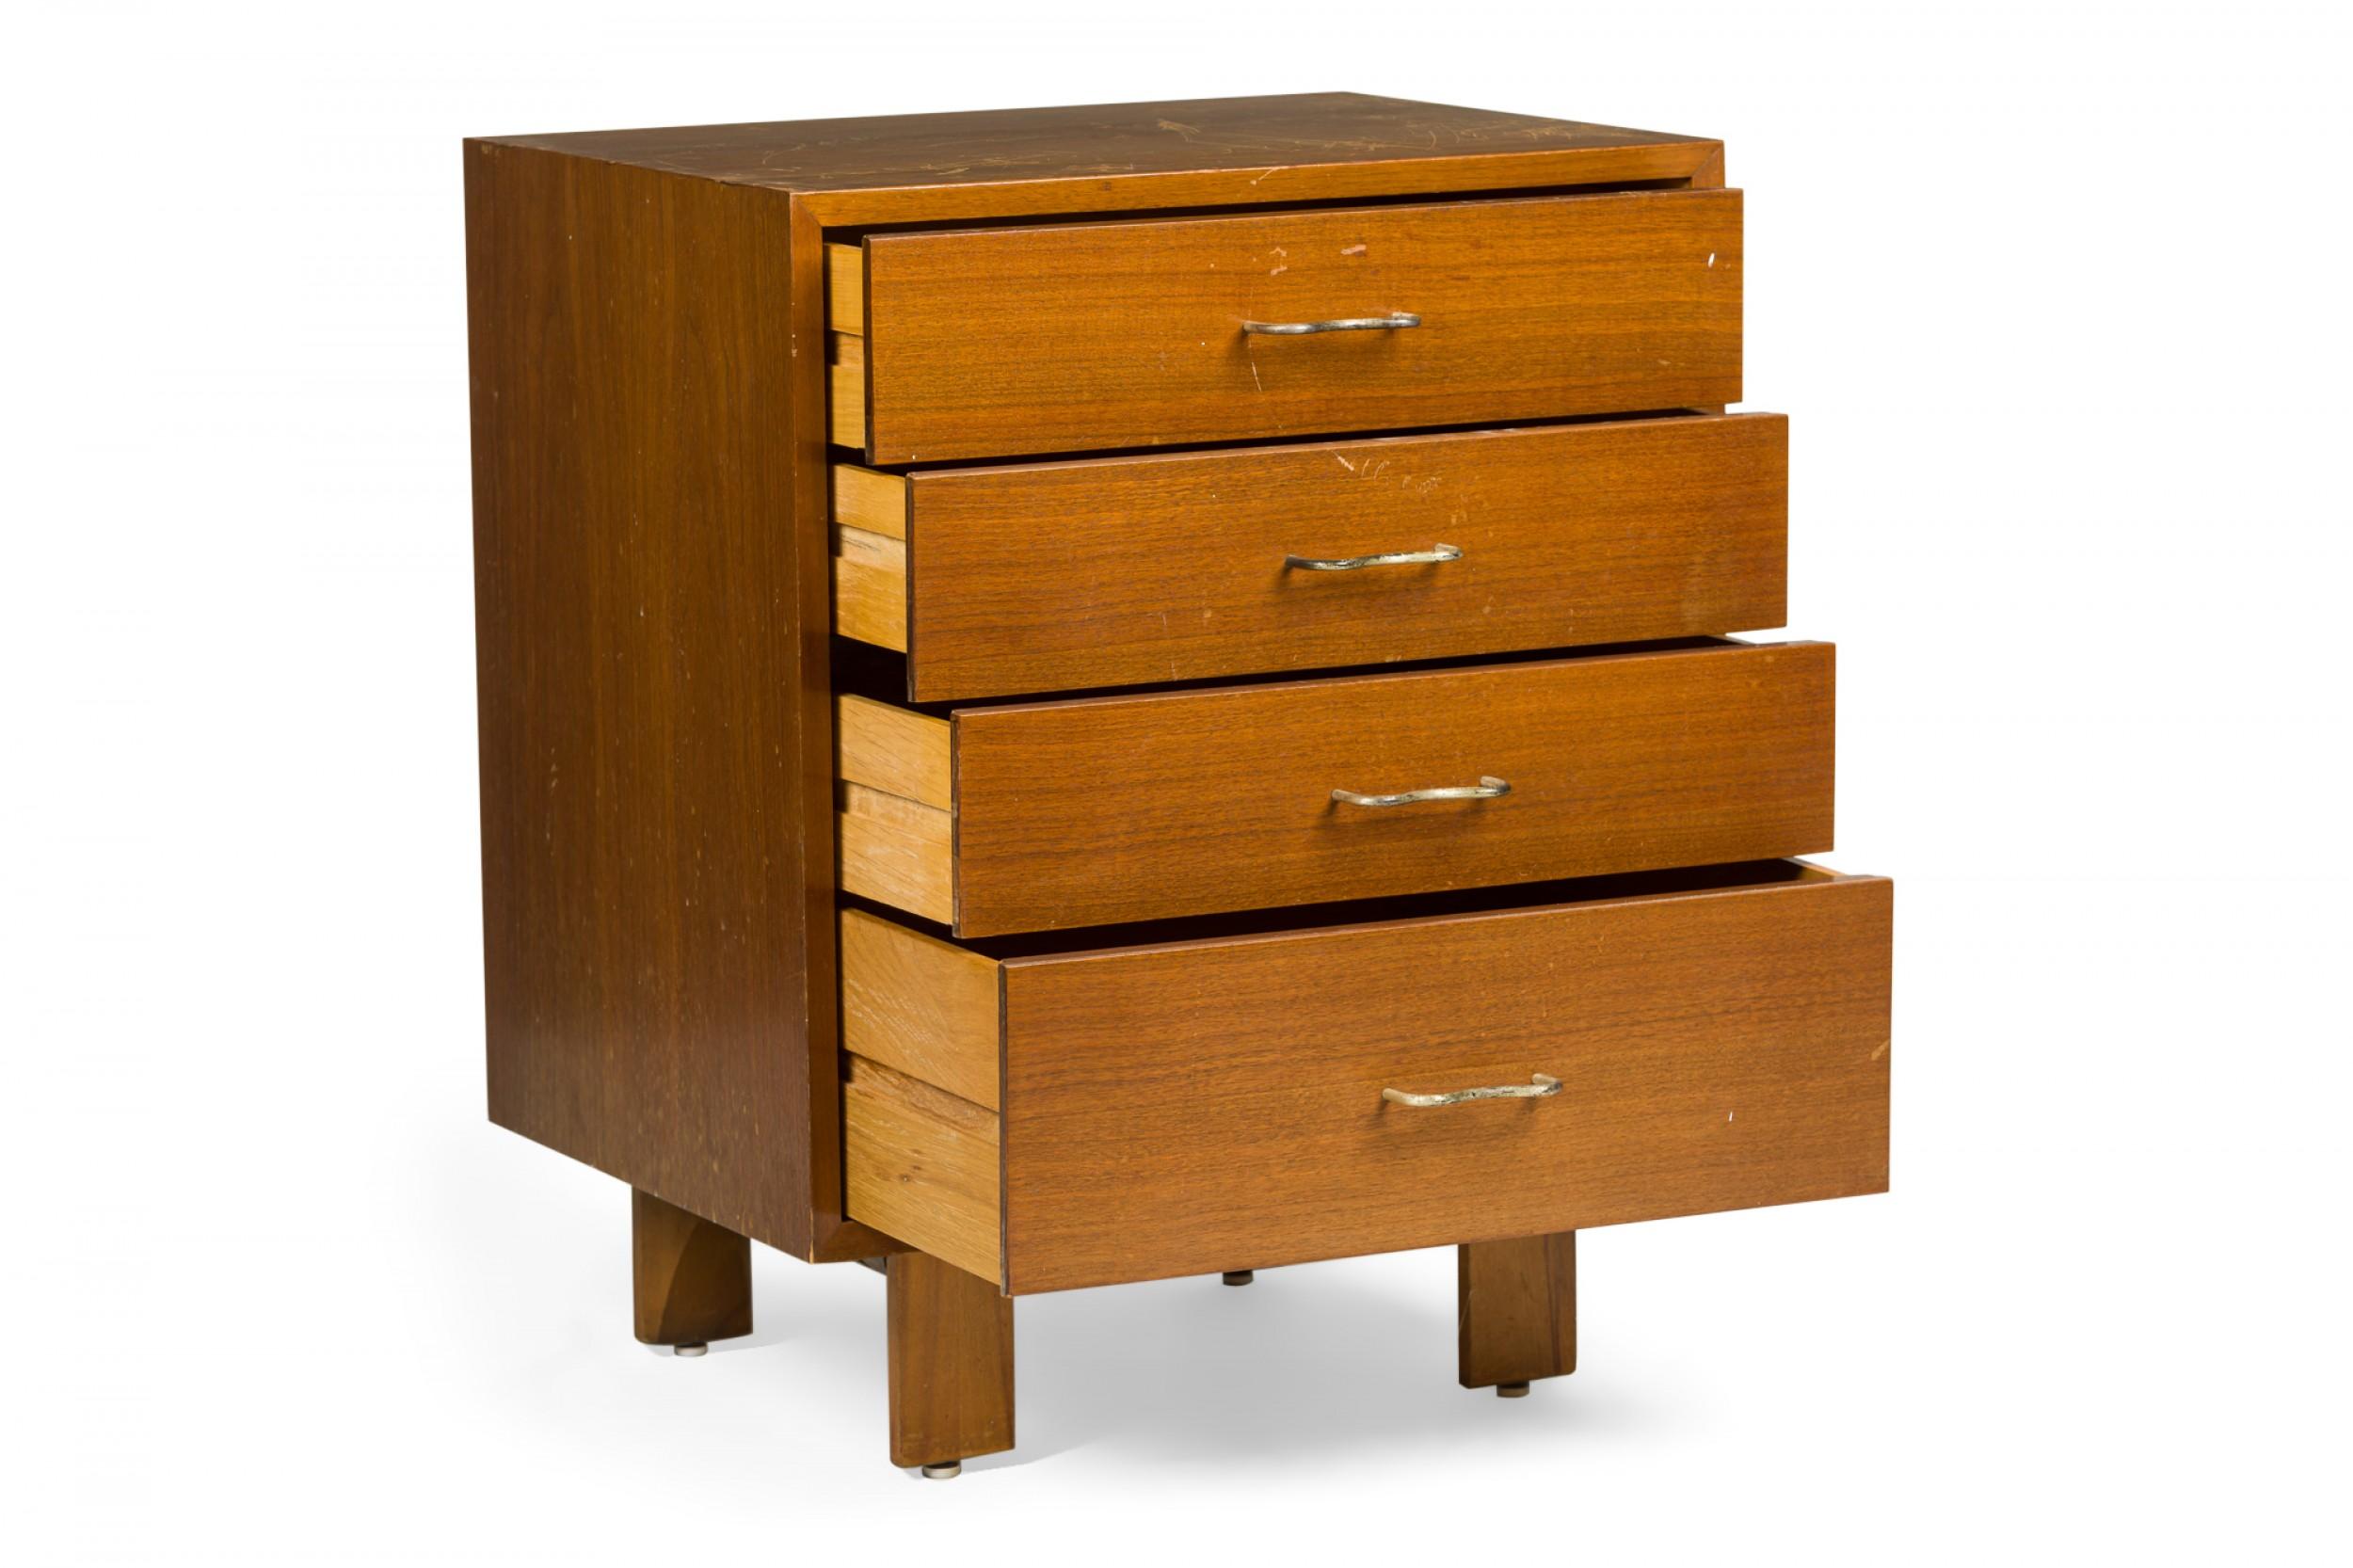 PAIR of American Mid-Century 4-drawer walnut veneer bedside tables / commodes with M-shaped silver metal handles, resting on four square wooden legs. (BCS Basic Cabinet Series, George Nelson for Herman Miller)(Priced as Pair).